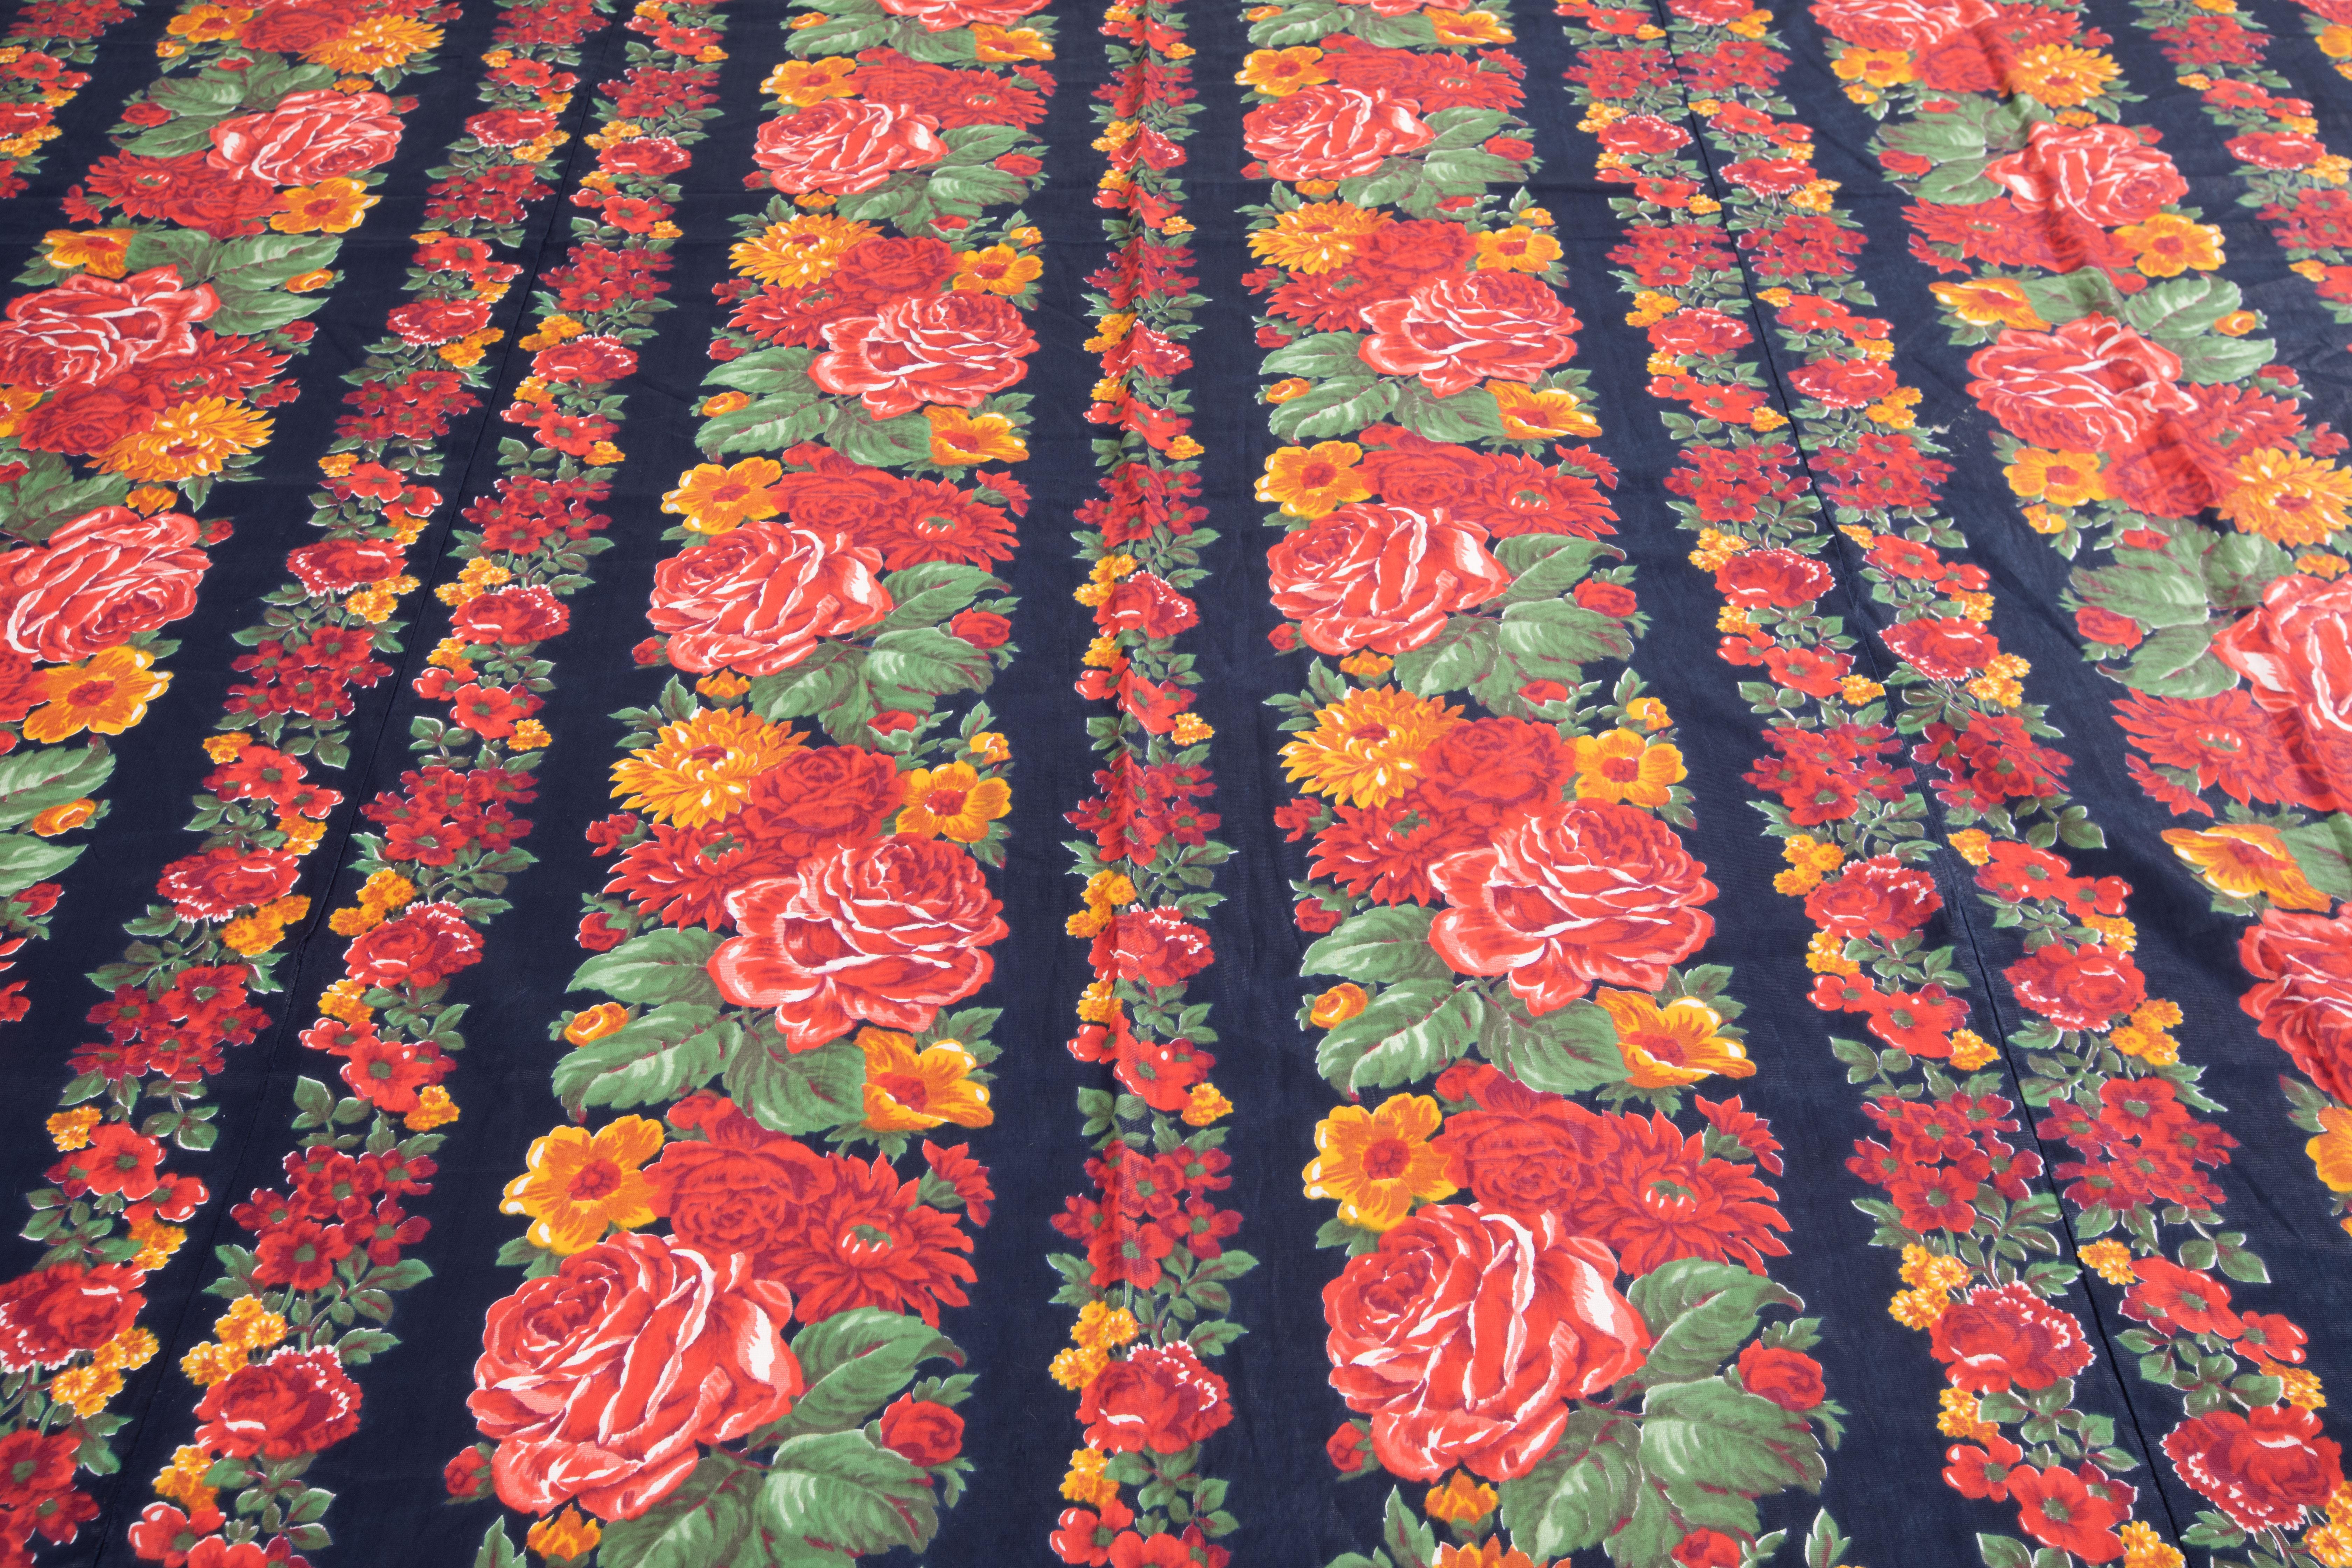 Russian Roller Printed Cotton Fabric Panel, Mid-20th Century or Earlier For Sale 5